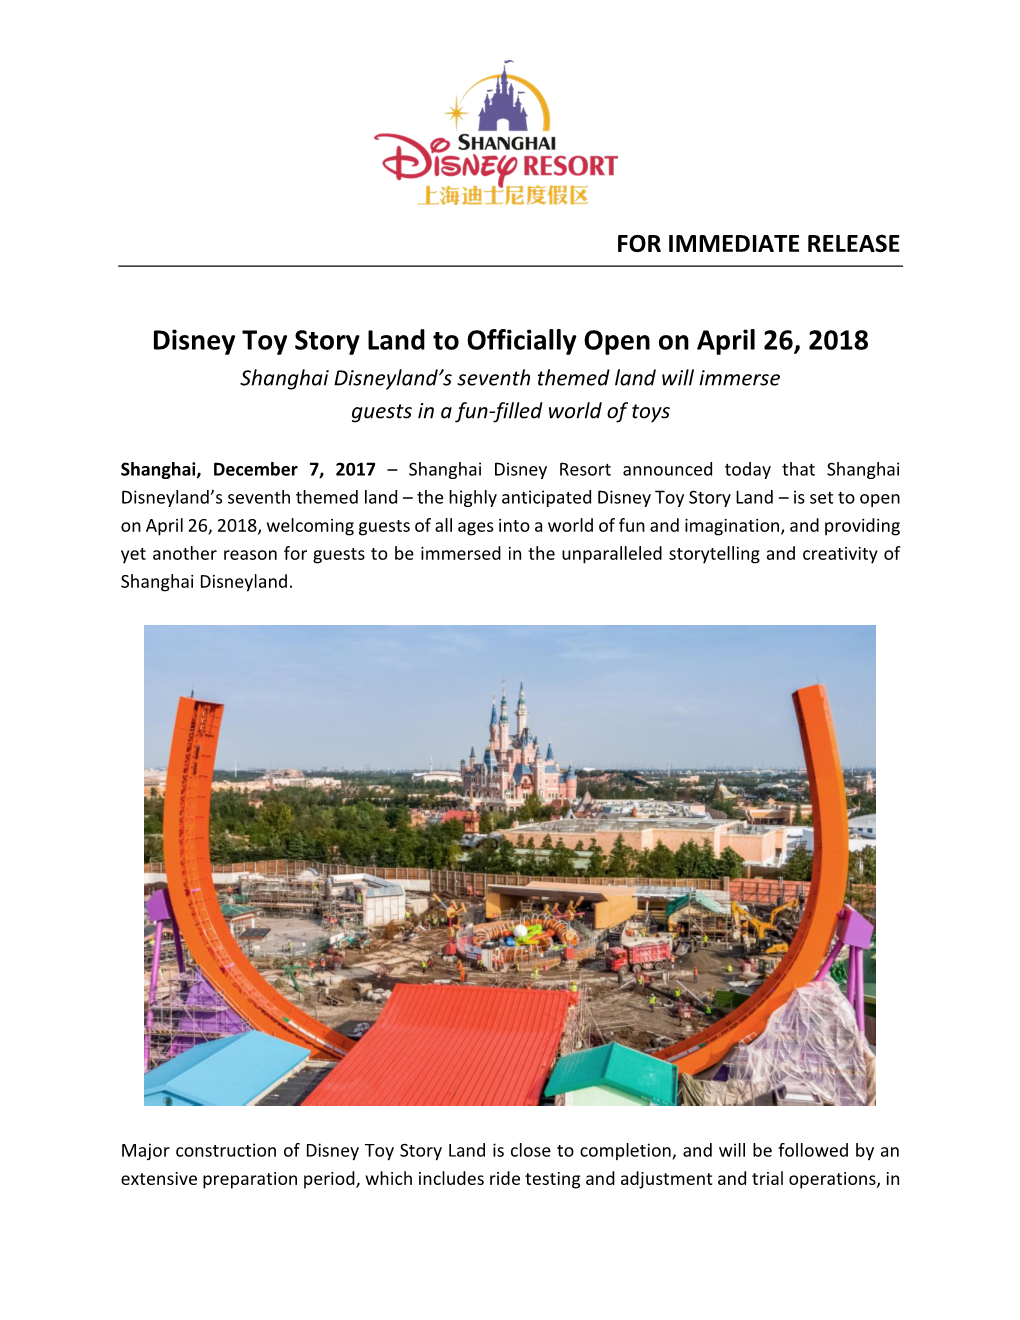 Disney Toy Story Land to Officially Open on April 26, 2018 Shanghai Disneyland’S Seventh Themed Land Will Immerse Guests in a Fun-Filled World of Toys